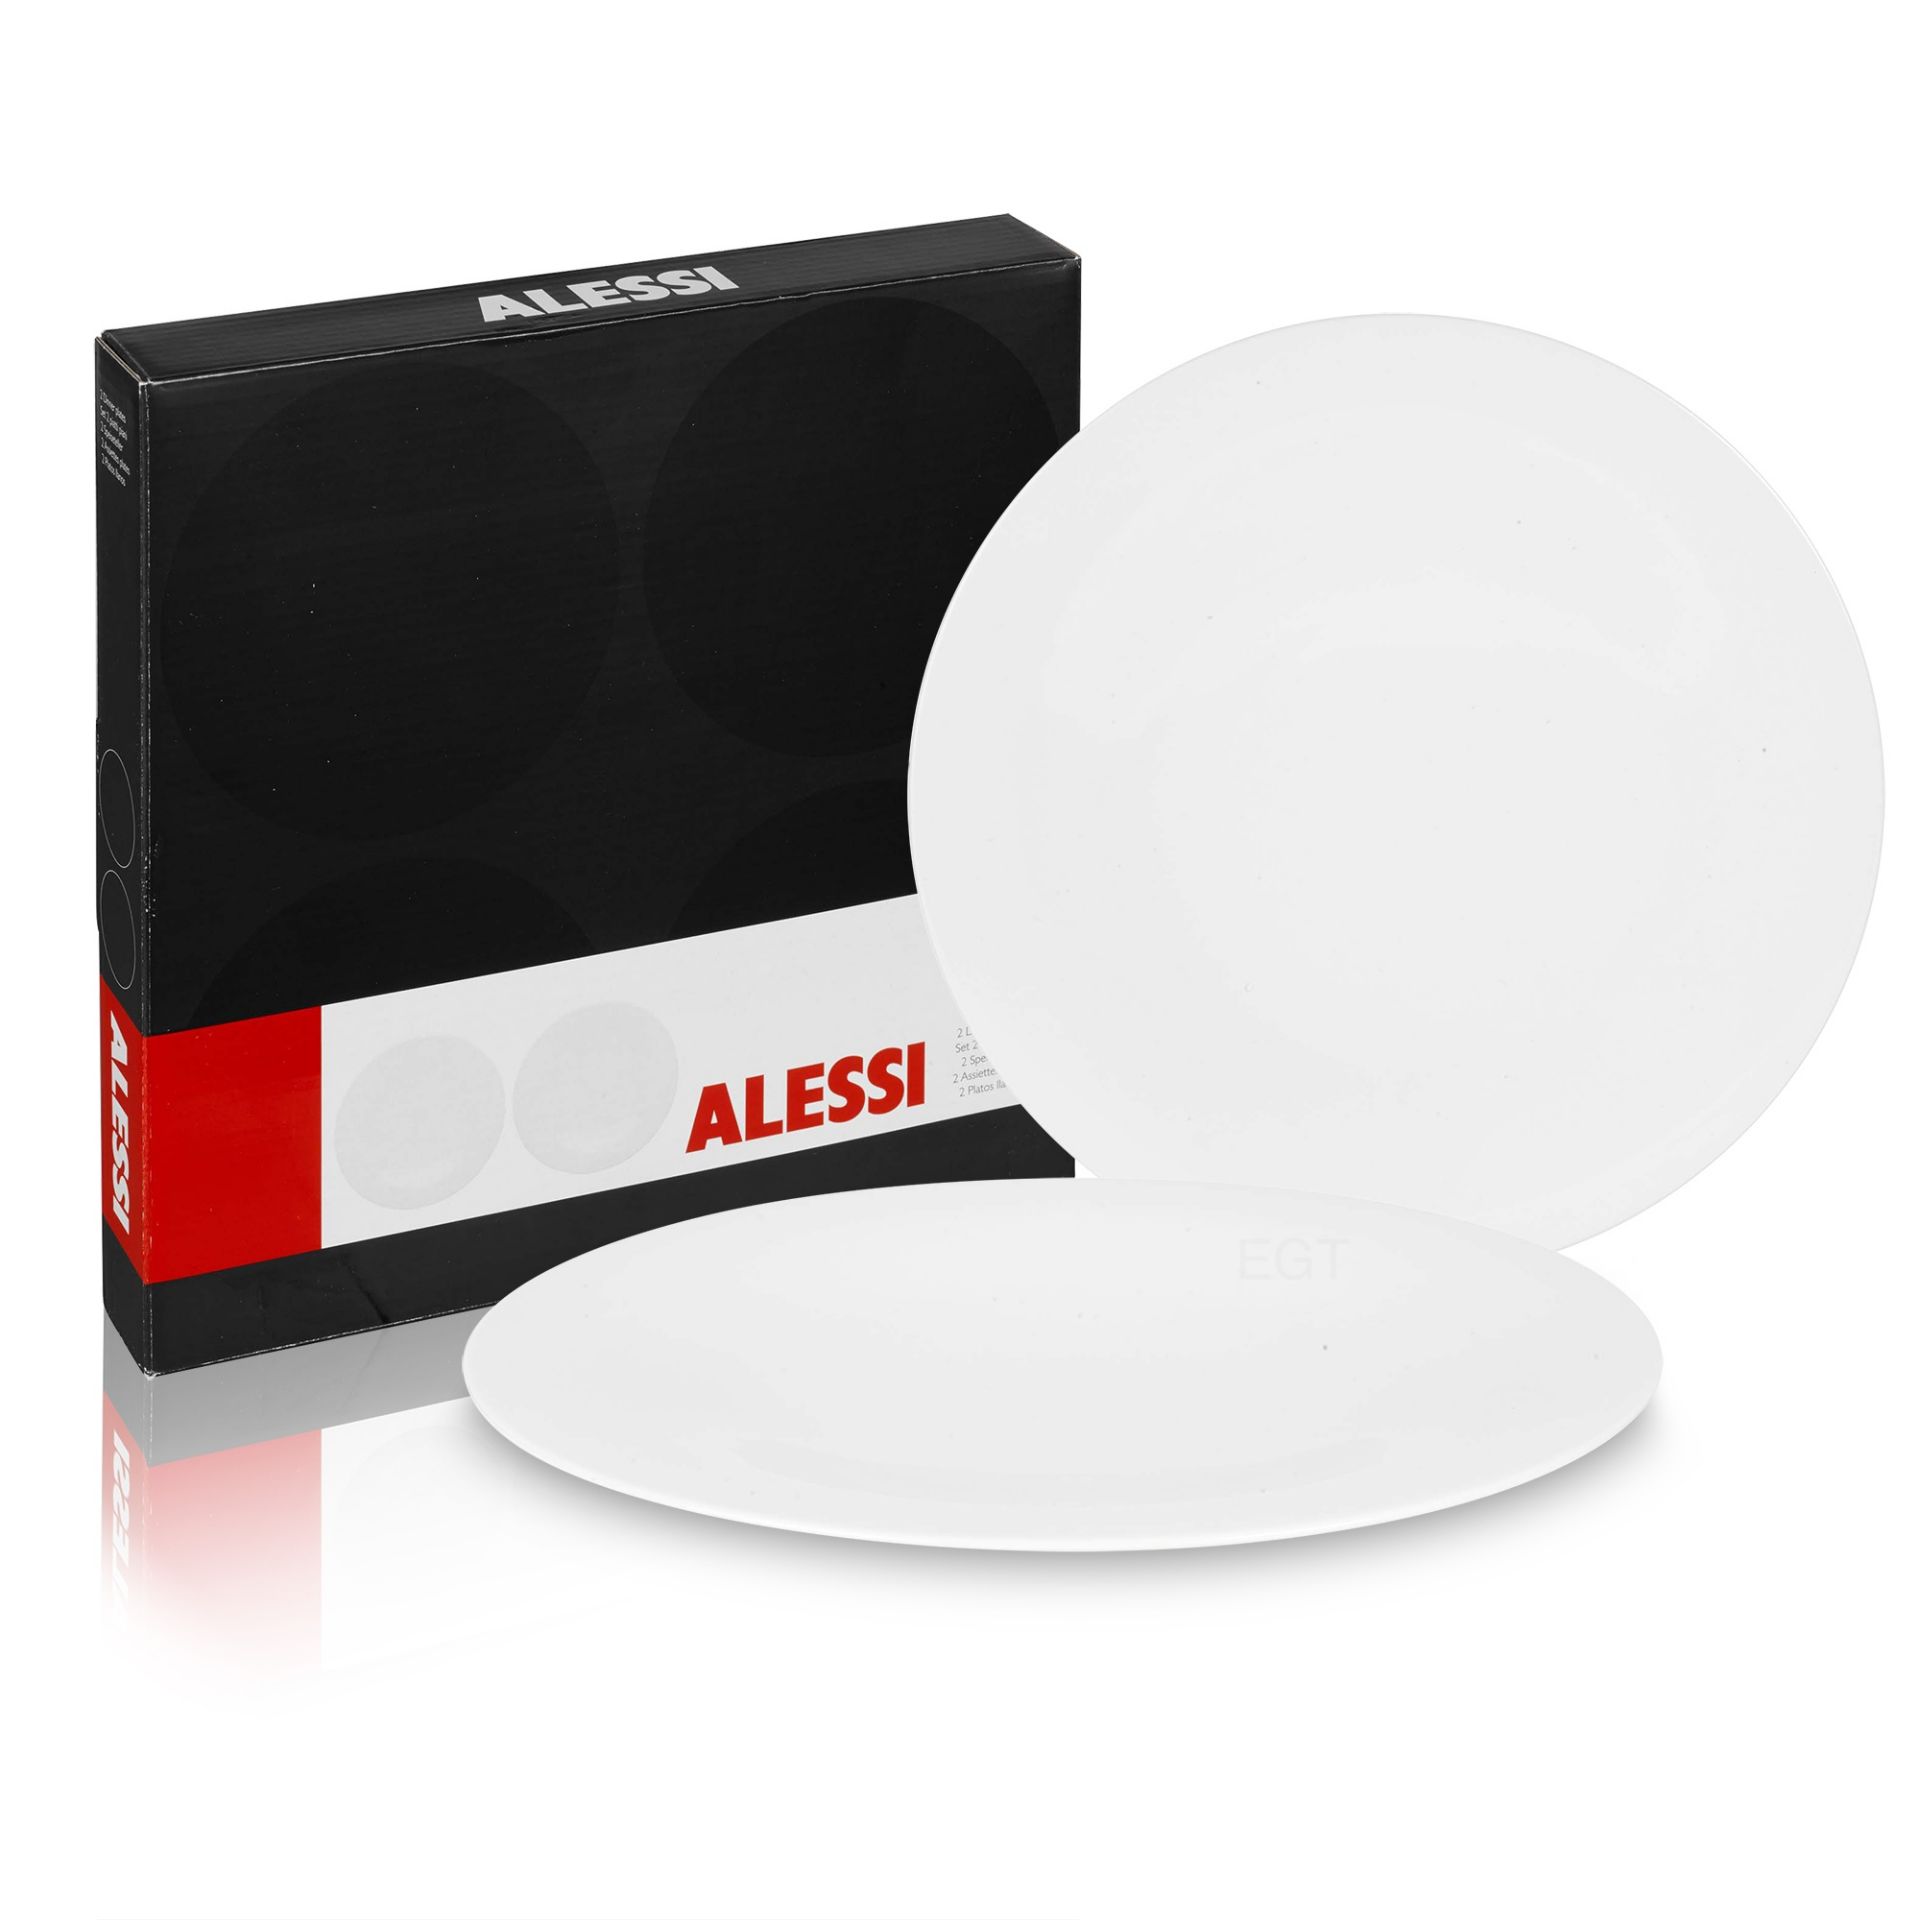 V Brand New Alessi Ku Set of Two Dinner Plates (£19.99 www.easygiftproducts.co.uk)